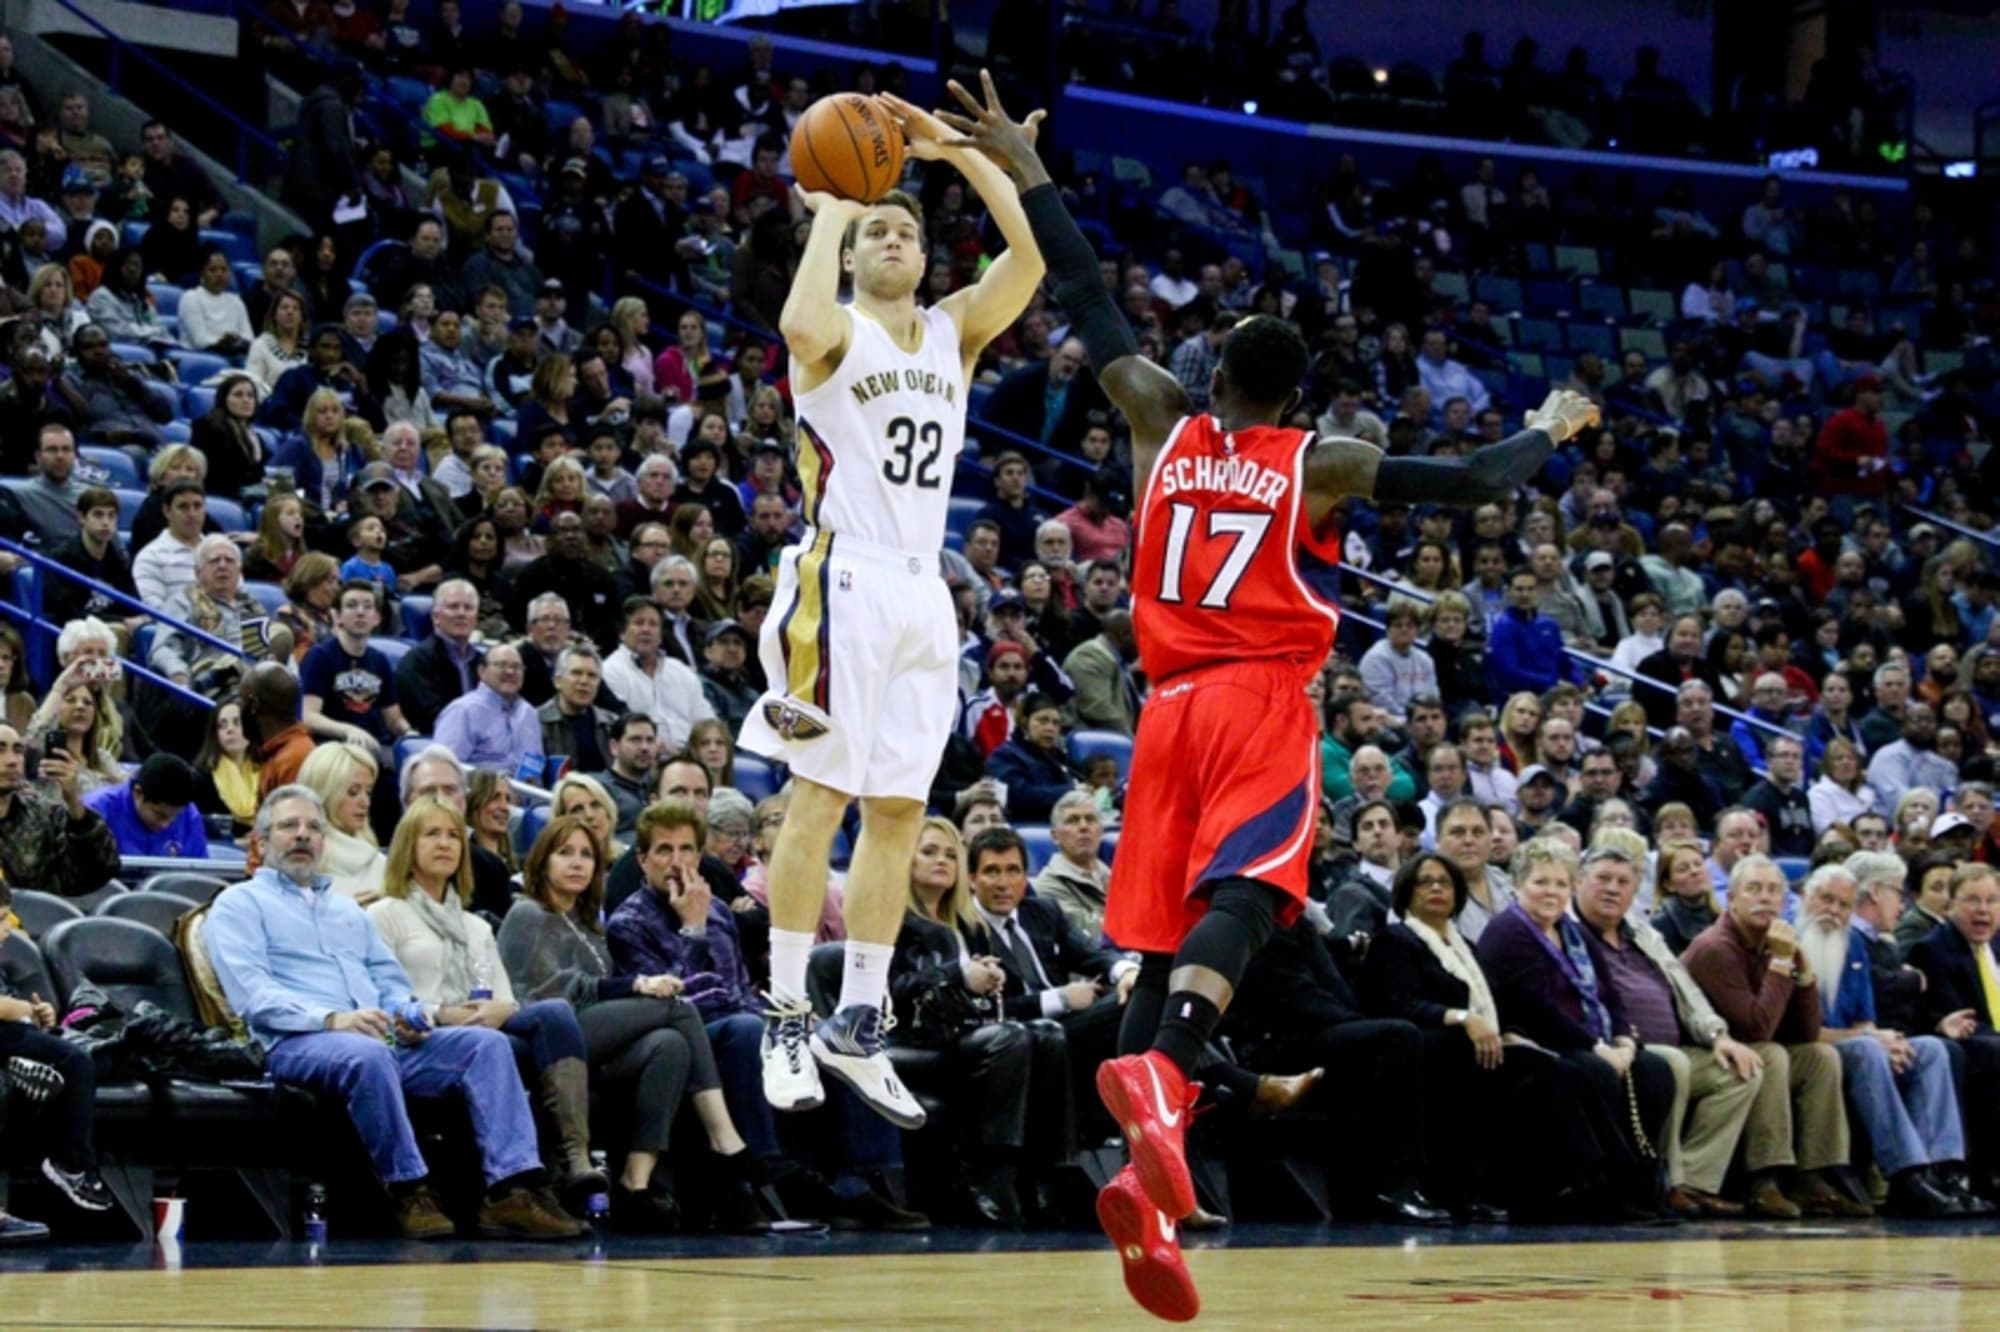 Does Jimmer Fredette Want To Be Just Another NBA Player Or A Super